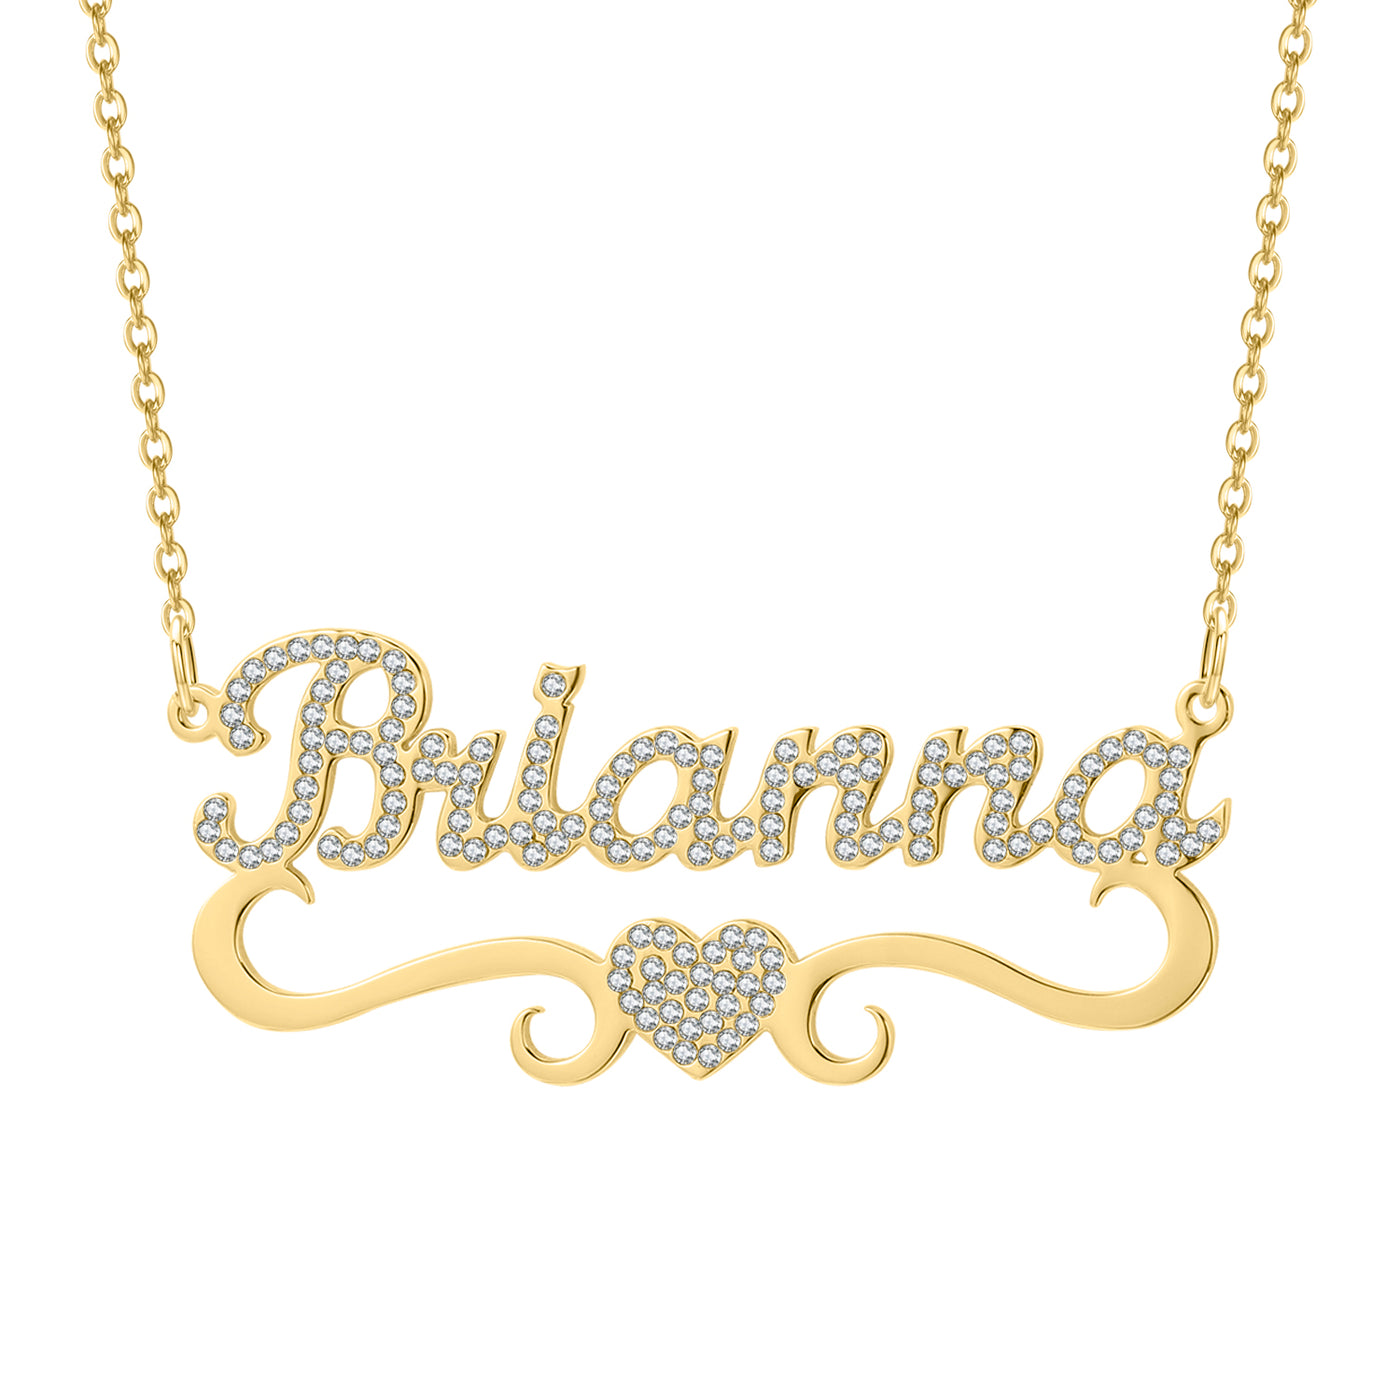 The Lanie Necklace